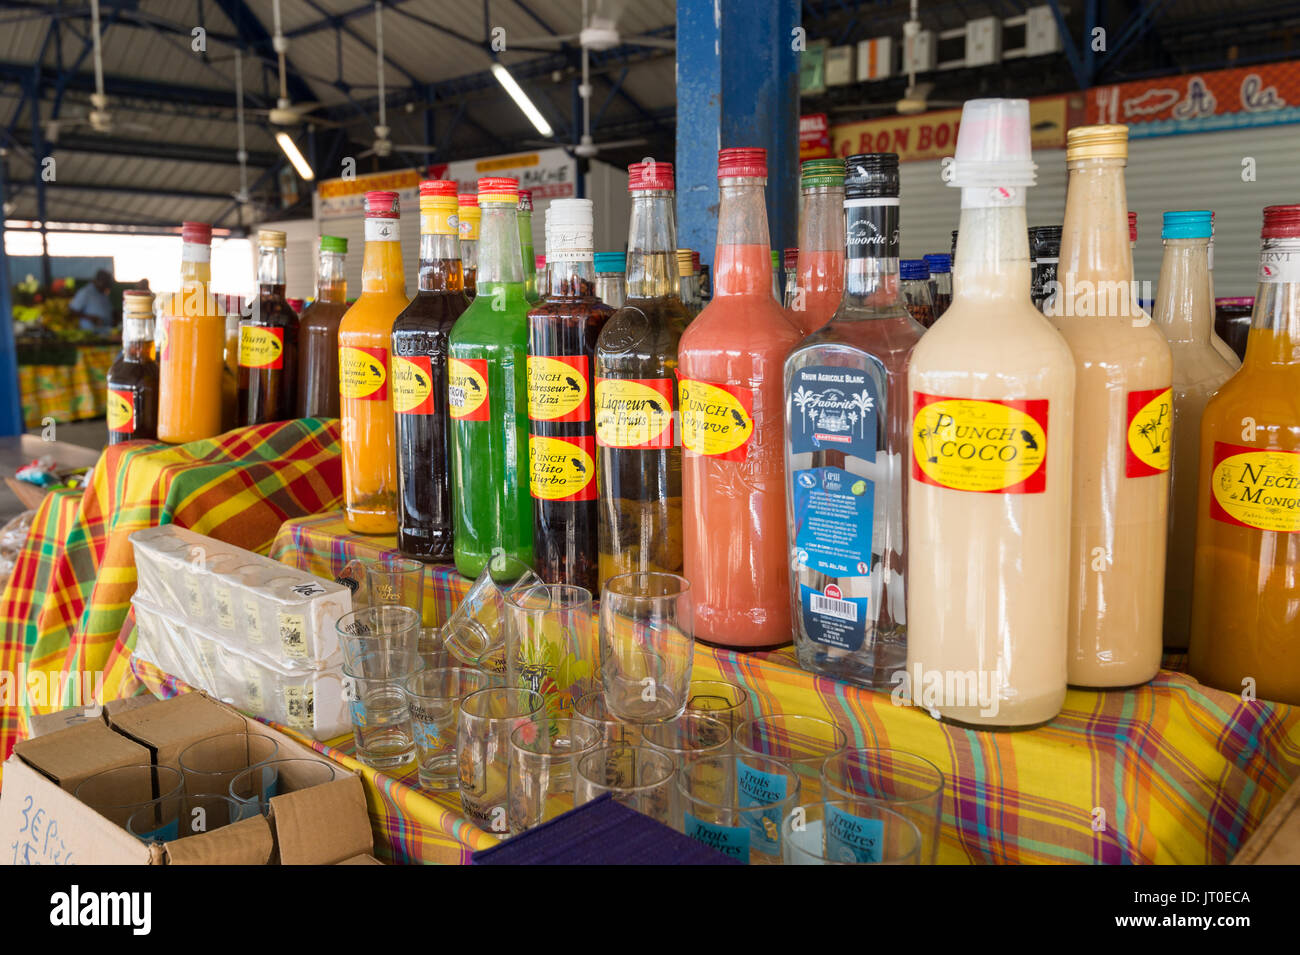 Traditional flavored rum bottles at the market in Martinique, Caribbean. Stock Photo